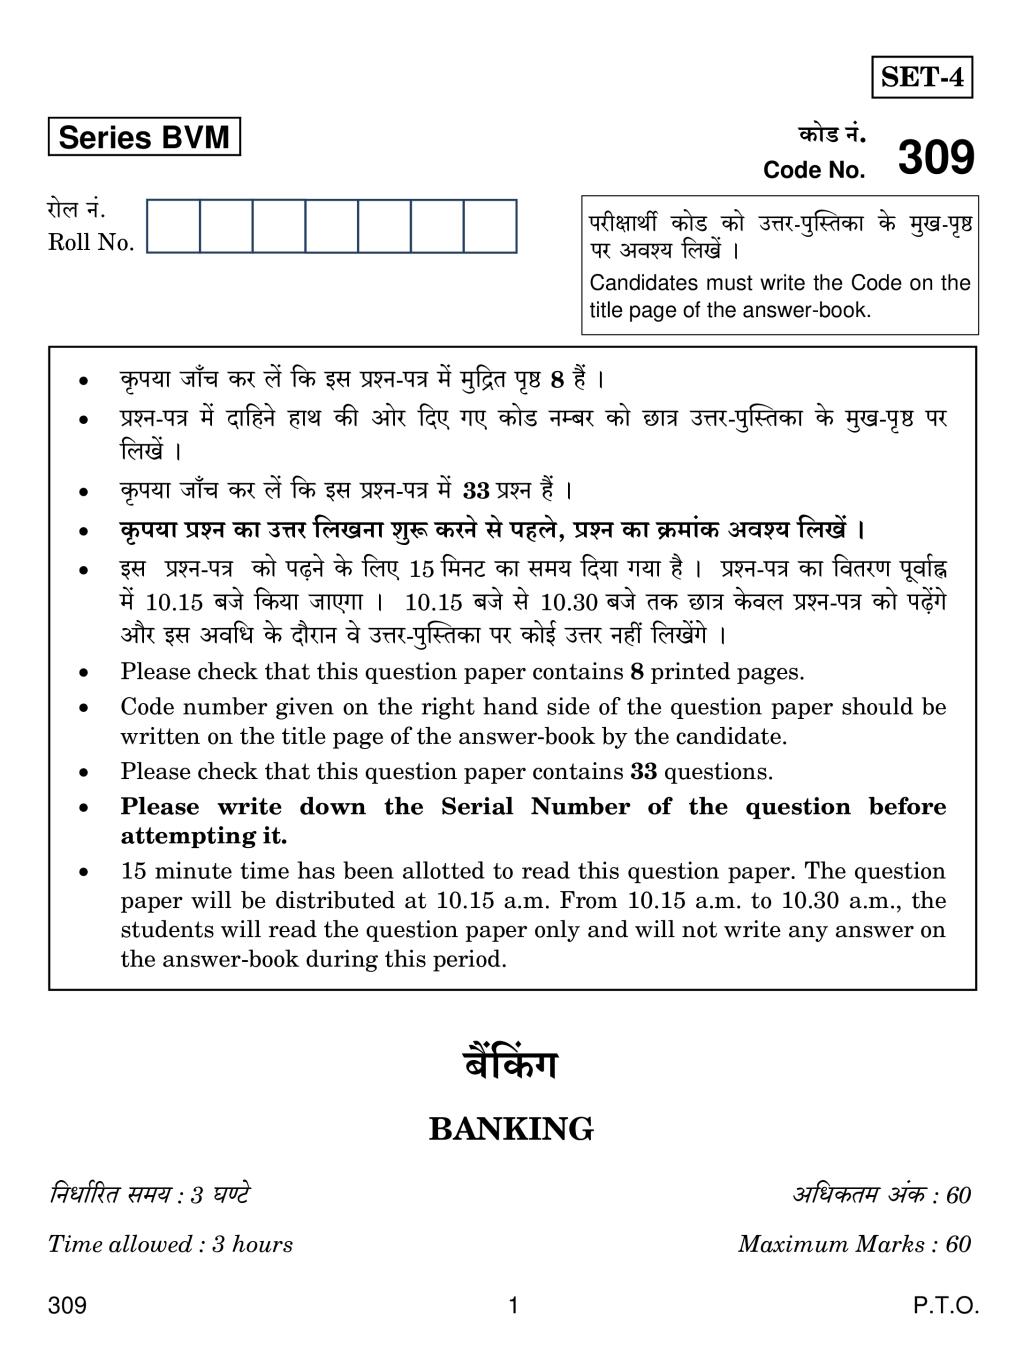 CBSE Class 12 Banking Question Paper 2019 - Page 1